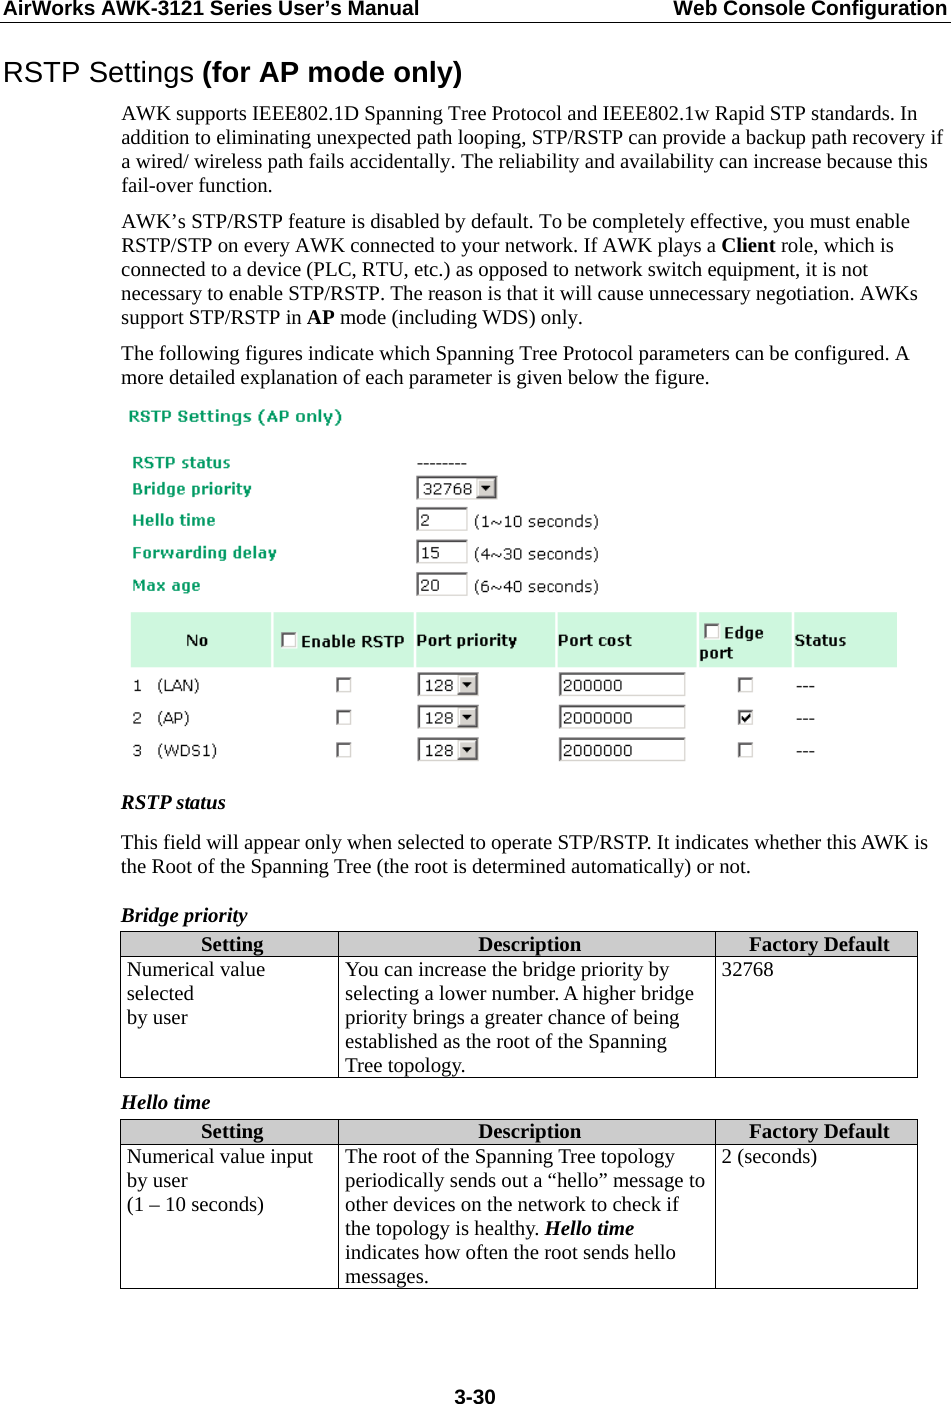 AirWorks AWK-3121 Series User’s Manual  Web Console Configuration  3-30RSTP Settings (for AP mode only) AWK supports IEEE802.1D Spanning Tree Protocol and IEEE802.1w Rapid STP standards. In addition to eliminating unexpected path looping, STP/RSTP can provide a backup path recovery if a wired/ wireless path fails accidentally. The reliability and availability can increase because this fail-over function. AWK’s STP/RSTP feature is disabled by default. To be completely effective, you must enable RSTP/STP on every AWK connected to your network. If AWK plays a Client role, which is connected to a device (PLC, RTU, etc.) as opposed to network switch equipment, it is not necessary to enable STP/RSTP. The reason is that it will cause unnecessary negotiation. AWKs support STP/RSTP in AP mode (including WDS) only. The following figures indicate which Spanning Tree Protocol parameters can be configured. A more detailed explanation of each parameter is given below the figure.  RSTP status This field will appear only when selected to operate STP/RSTP. It indicates whether this AWK is the Root of the Spanning Tree (the root is determined automatically) or not. Bridge priority Setting  Description  Factory Default Numerical value selected by user You can increase the bridge priority by selecting a lower number. A higher bridge priority brings a greater chance of being established as the root of the Spanning Tree topology. 32768 Hello time Setting  Description  Factory Default Numerical value input by user (1 – 10 seconds) The root of the Spanning Tree topology periodically sends out a “hello” message to other devices on the network to check if the topology is healthy. Hello time indicates how often the root sends hello messages. 2 (seconds)  